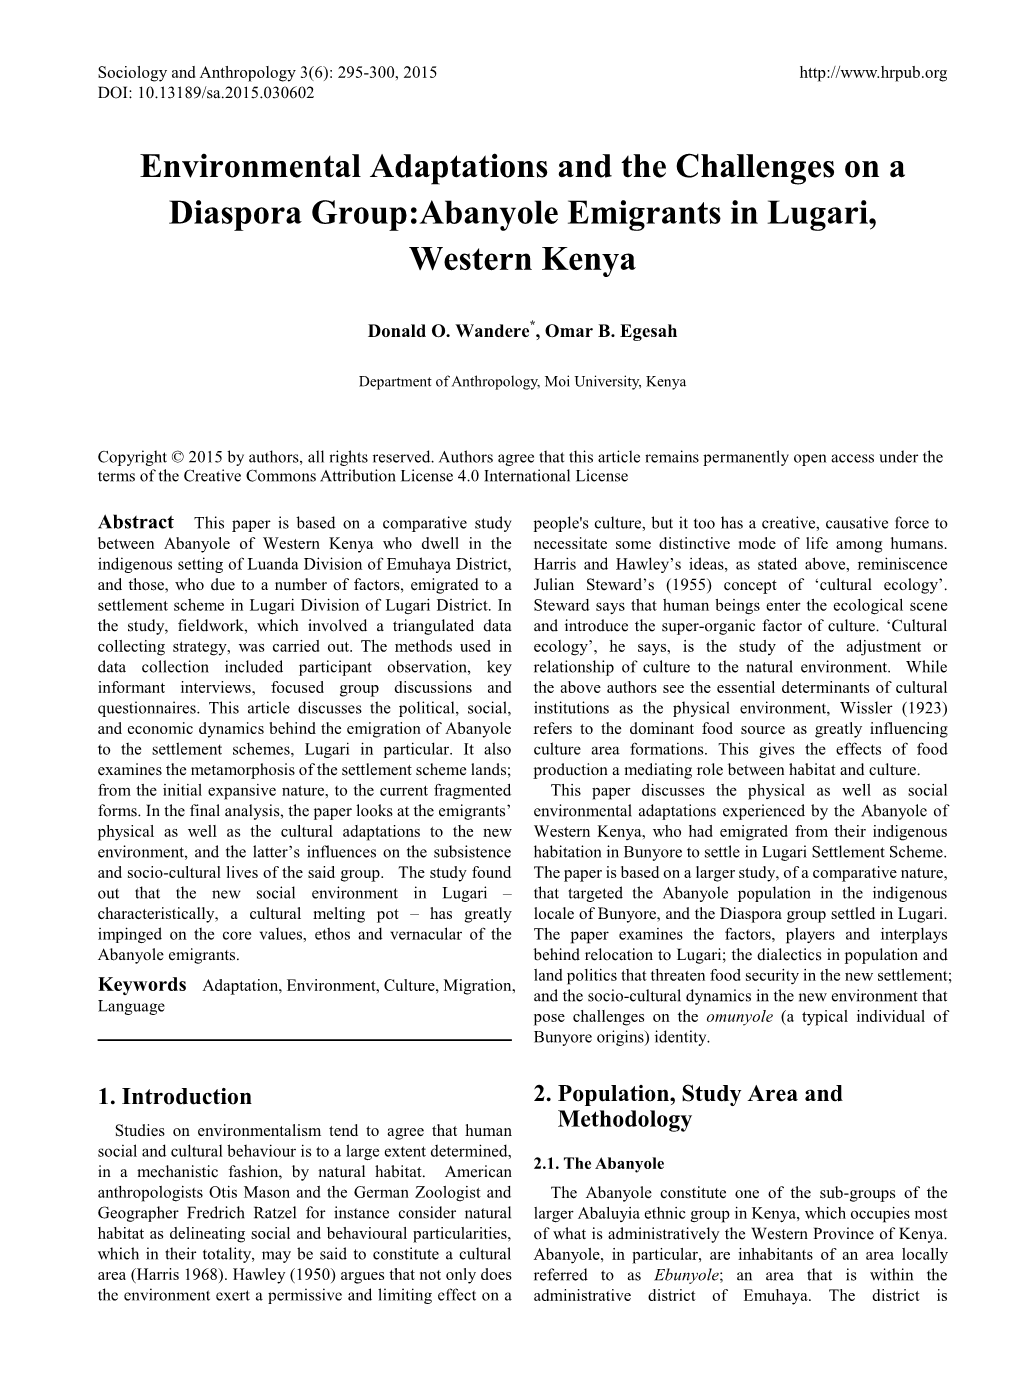 Environmental Adaptations and the Challenges on a Diaspora Group:Abanyole Emigrants in Lugari, Western Kenya